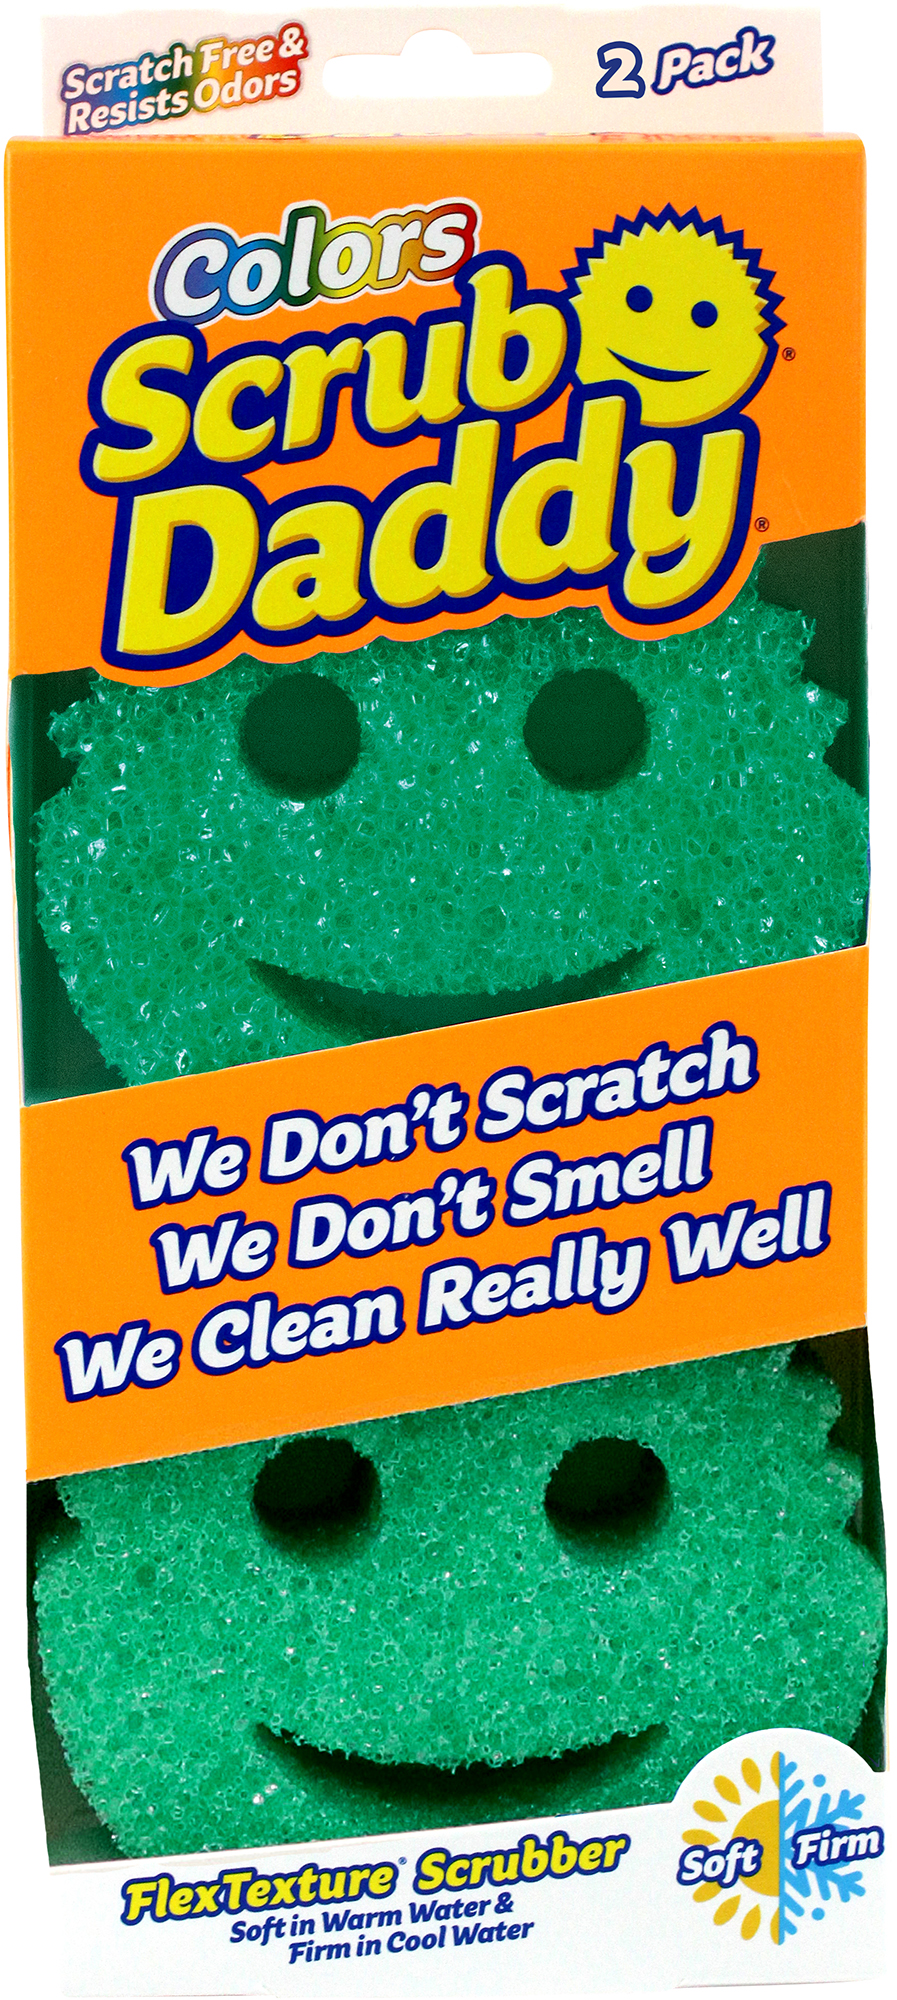 https://lyko.com/globalassets/product-images/scrub-daddy-green-twin-3375-107-0002_1.jpg?ref=A636B50D7A